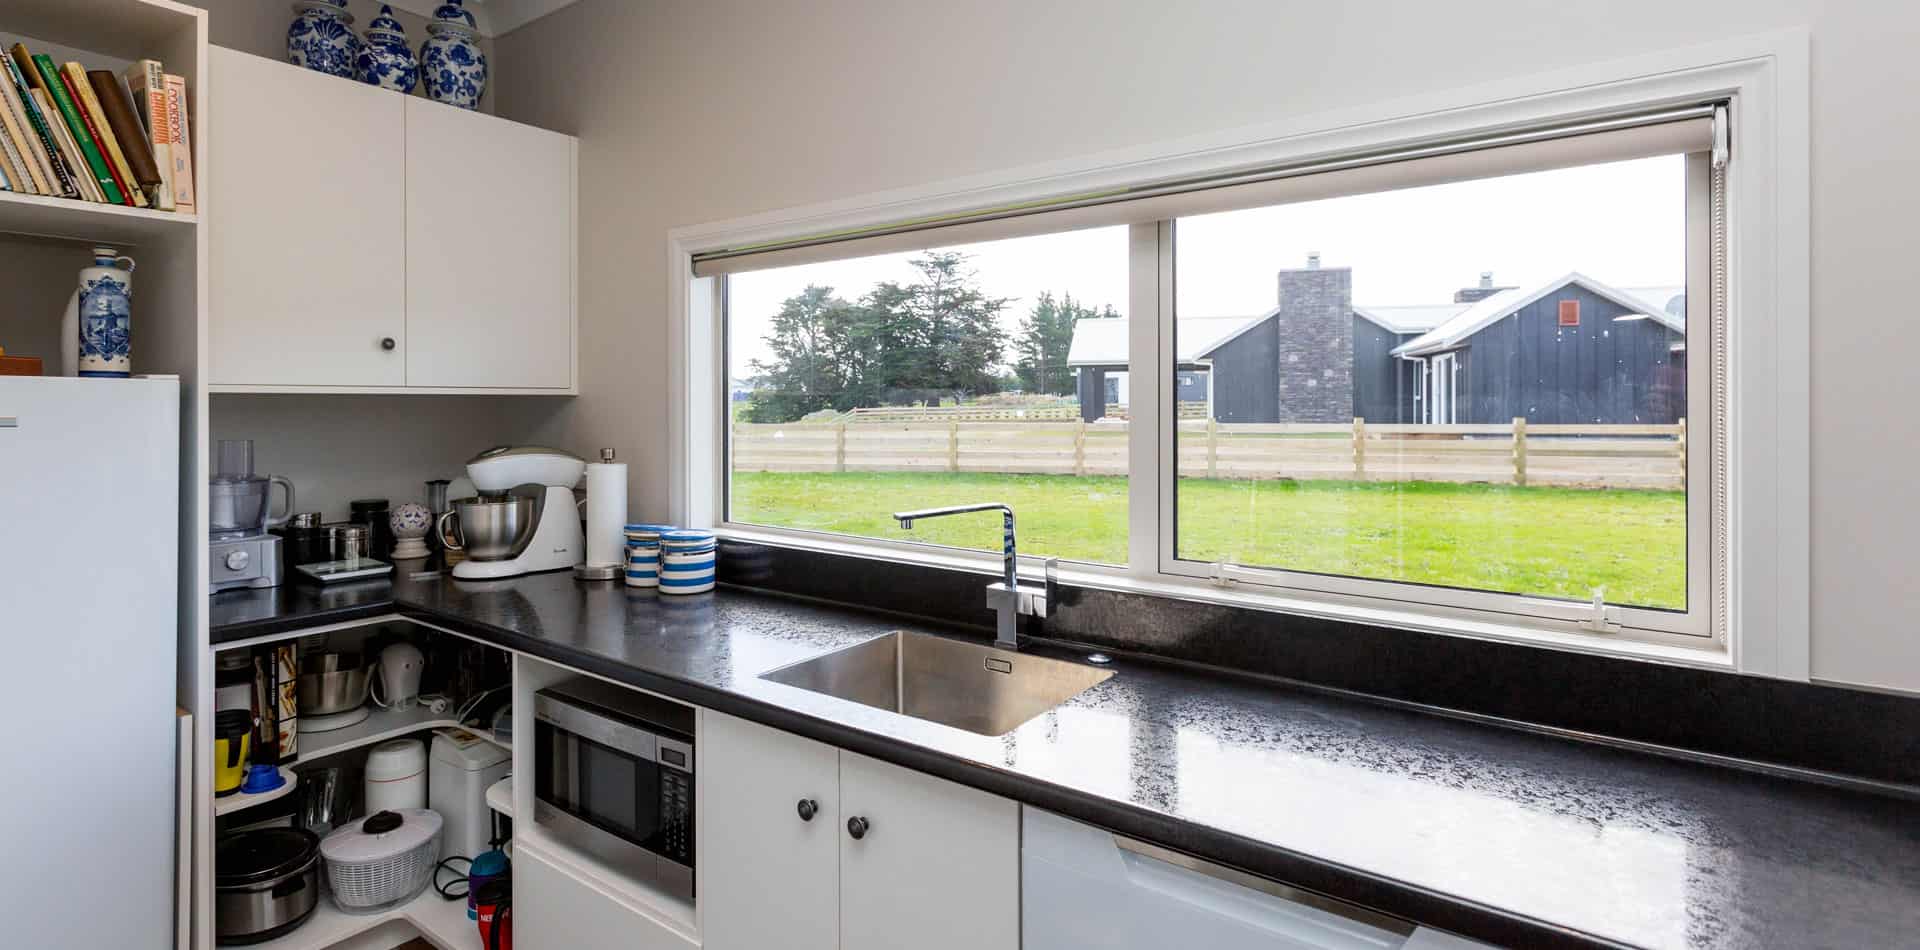 Fowler-Homes-design-and-build-new-zealand-wide-previous-builds-Manawatu-Meads-16